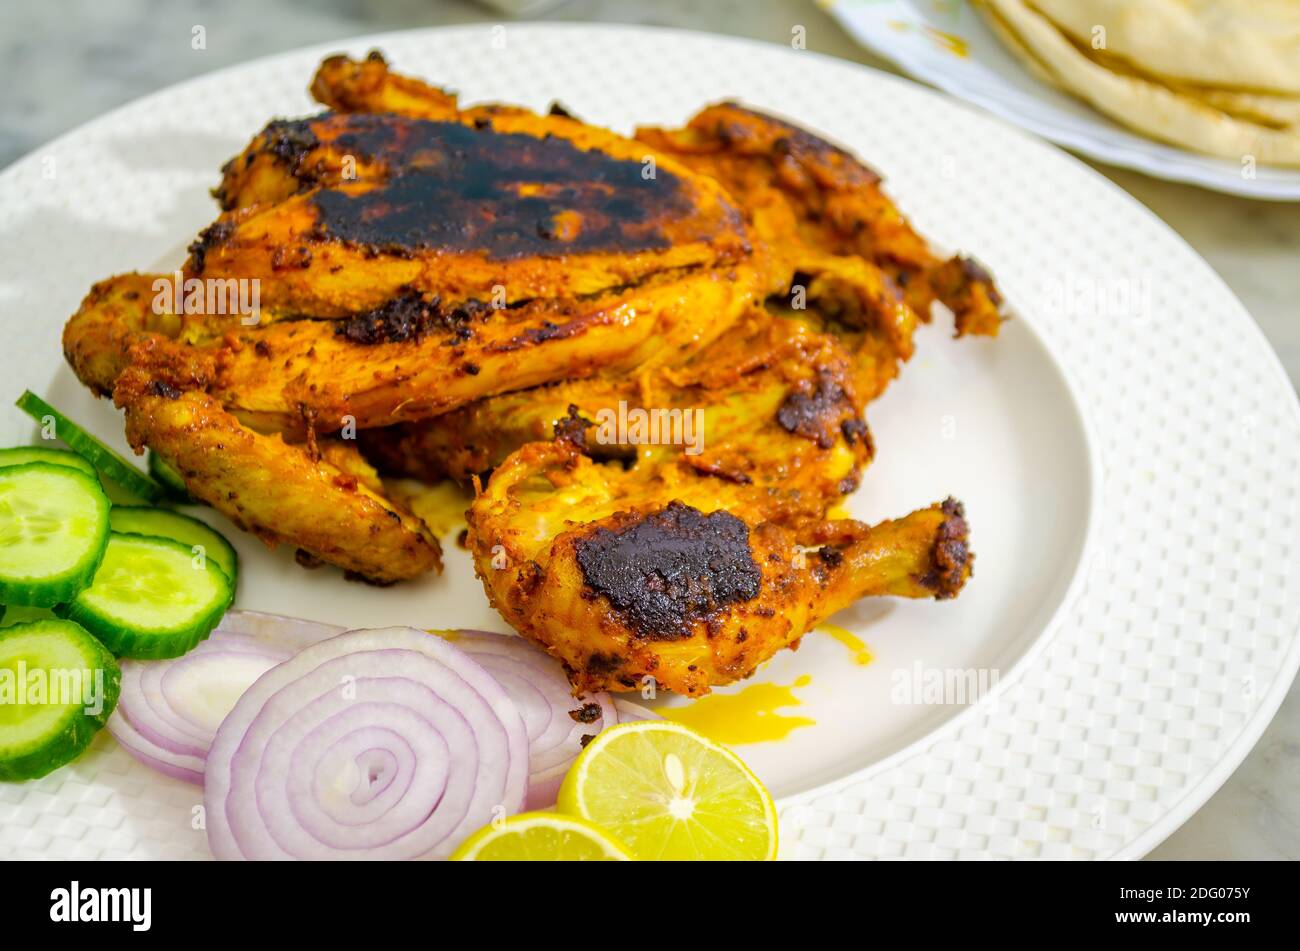 Beautifully placed ready-to-eat full chicken tandoori on a white plate along with sliced onions, cucumbers and lemon Stock Photo